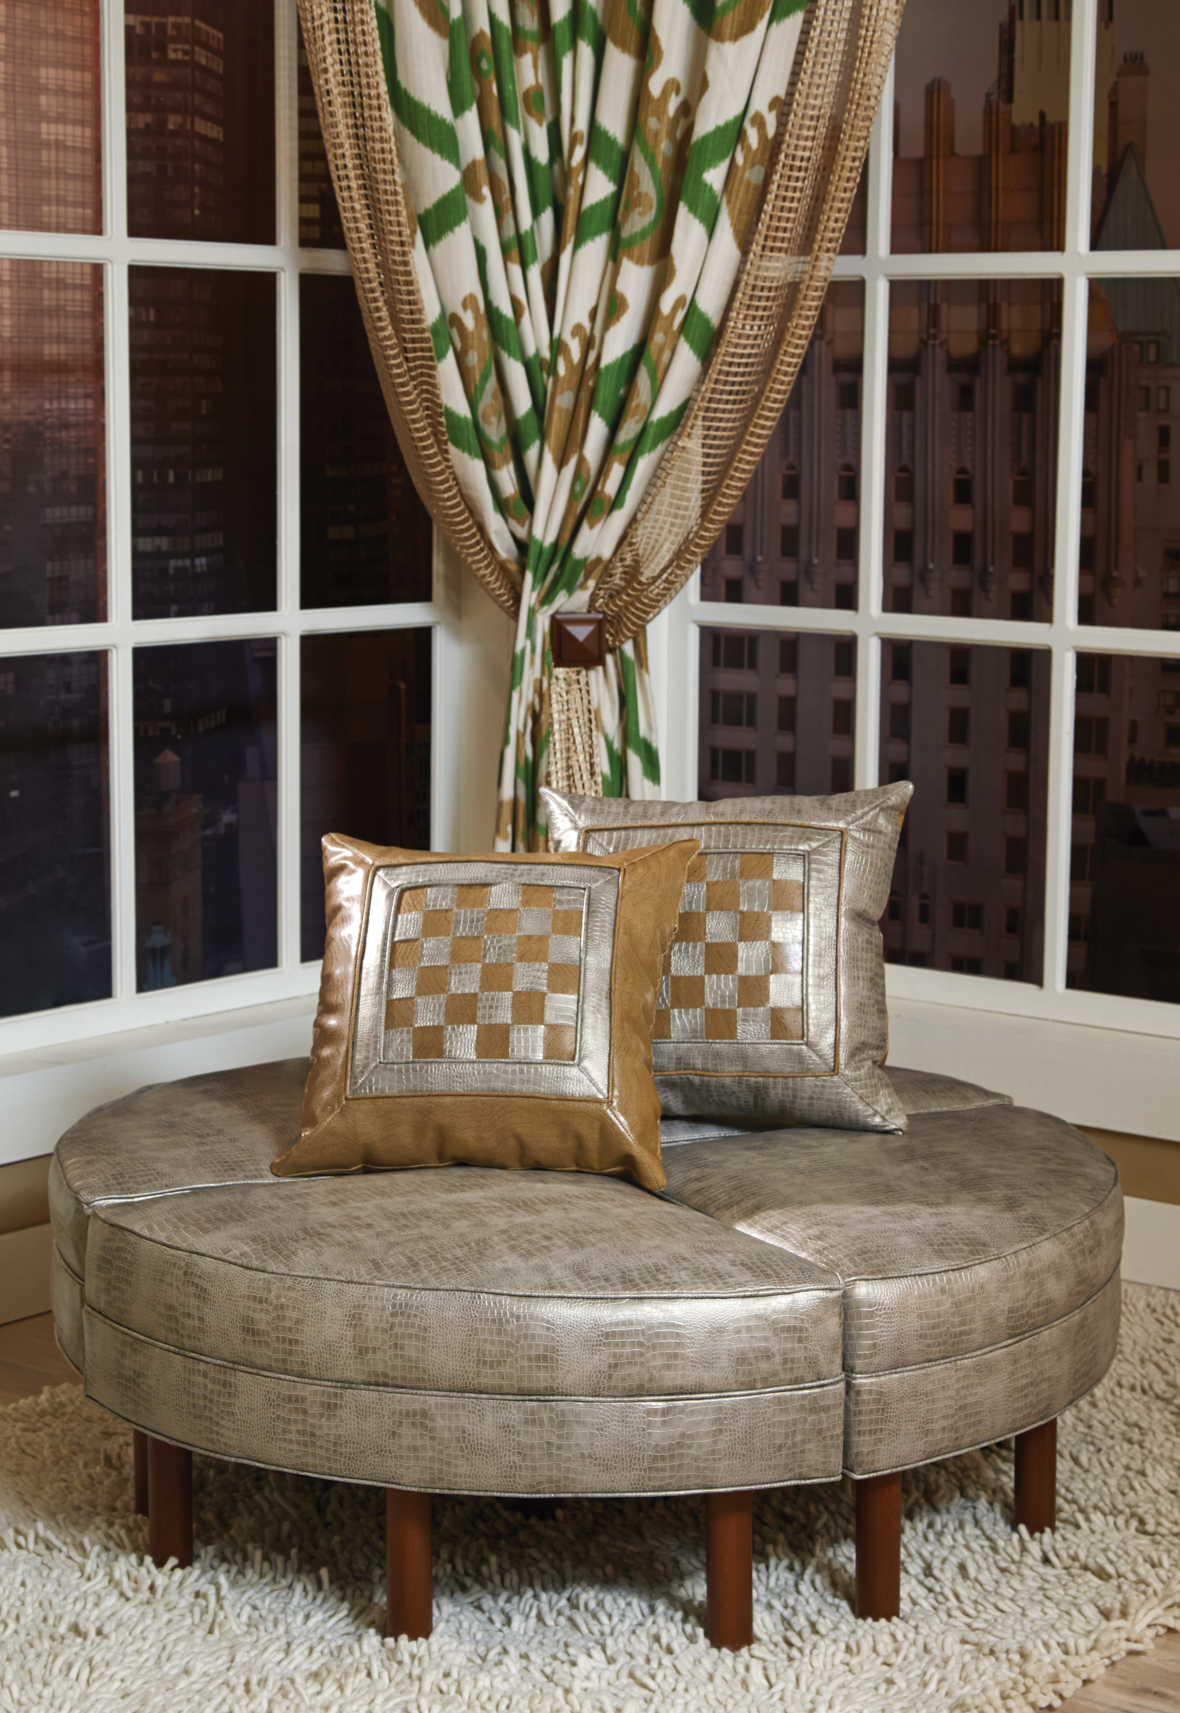 Holiday Entertaining Spaces - Ottoman